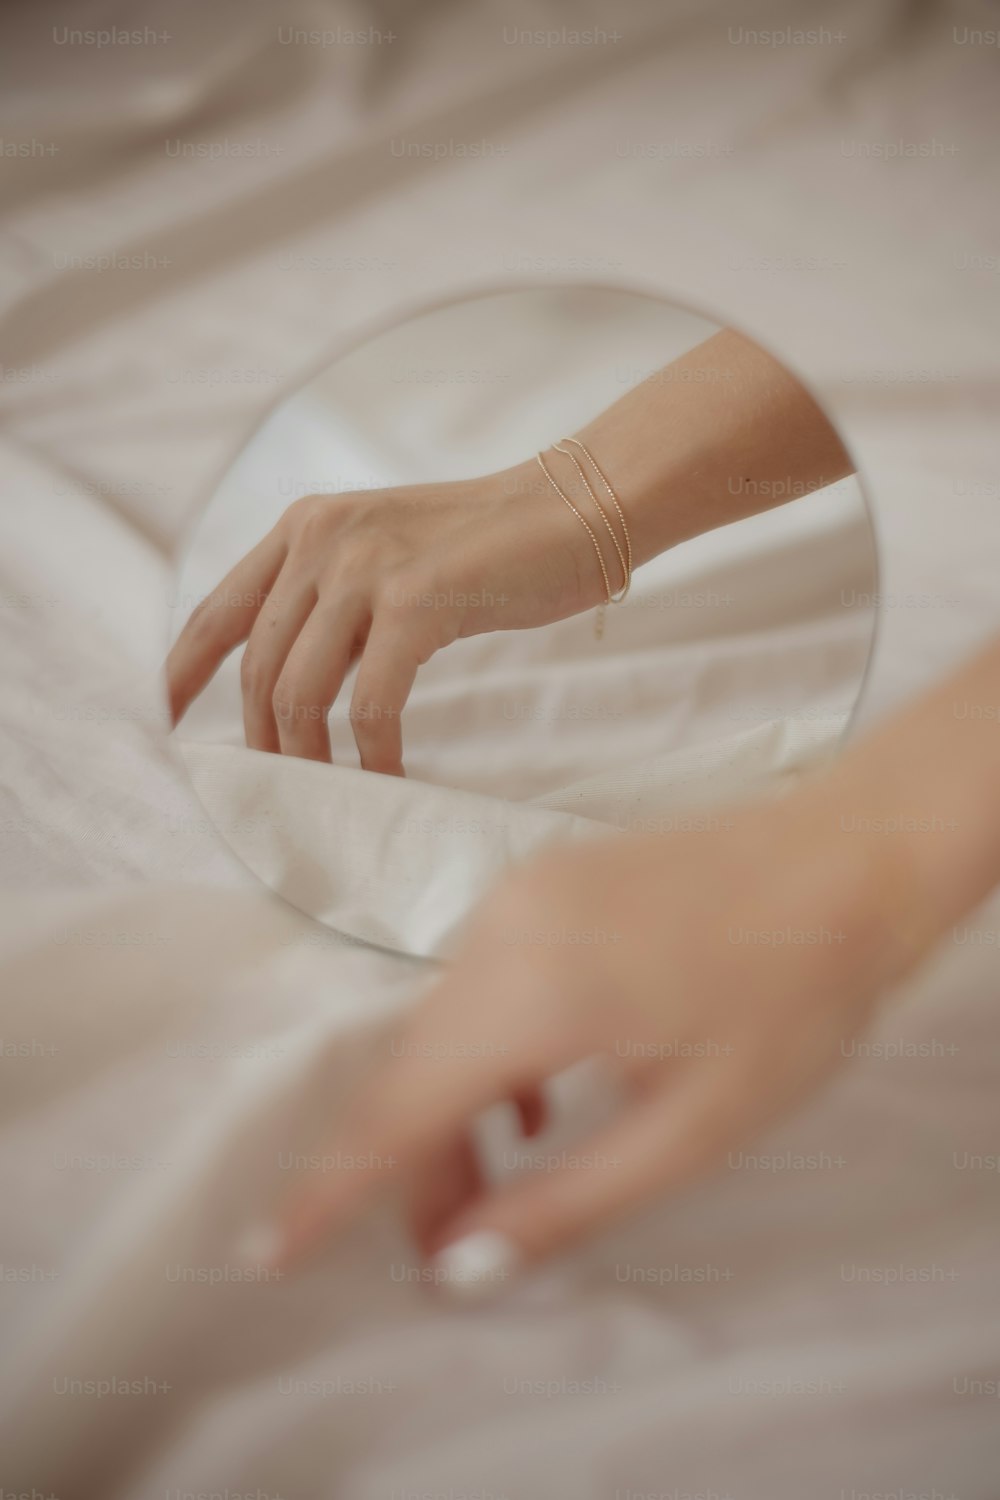 a person's hand touching a mirror on a bed